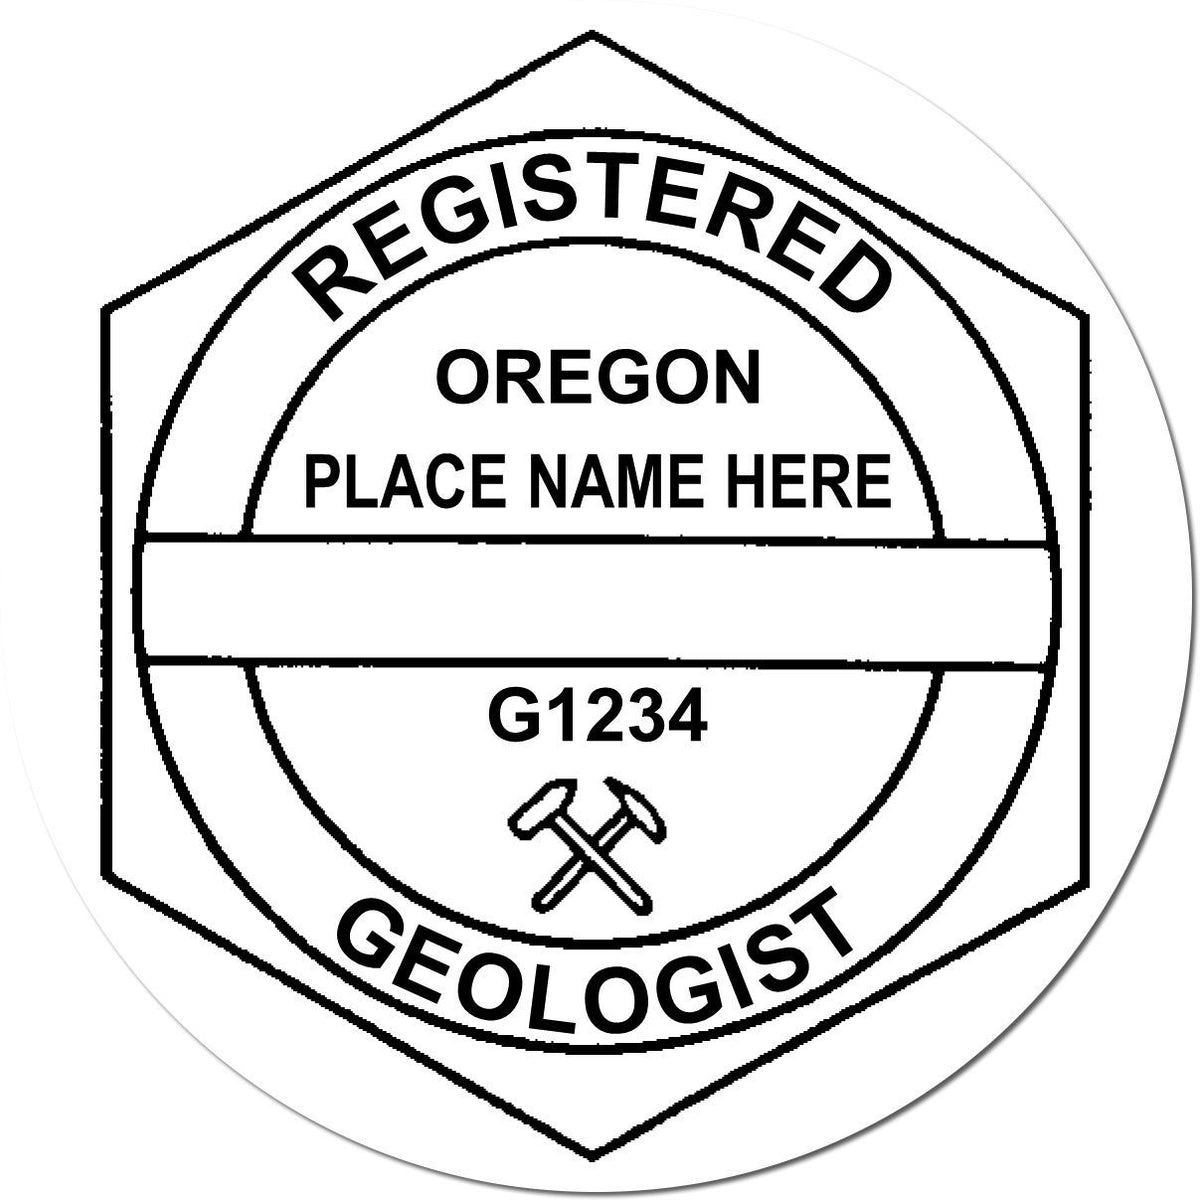 This paper is stamped with a sample imprint of the Digital Oregon Geologist Stamp, Electronic Seal for Oregon Geologist, signifying its quality and reliability.